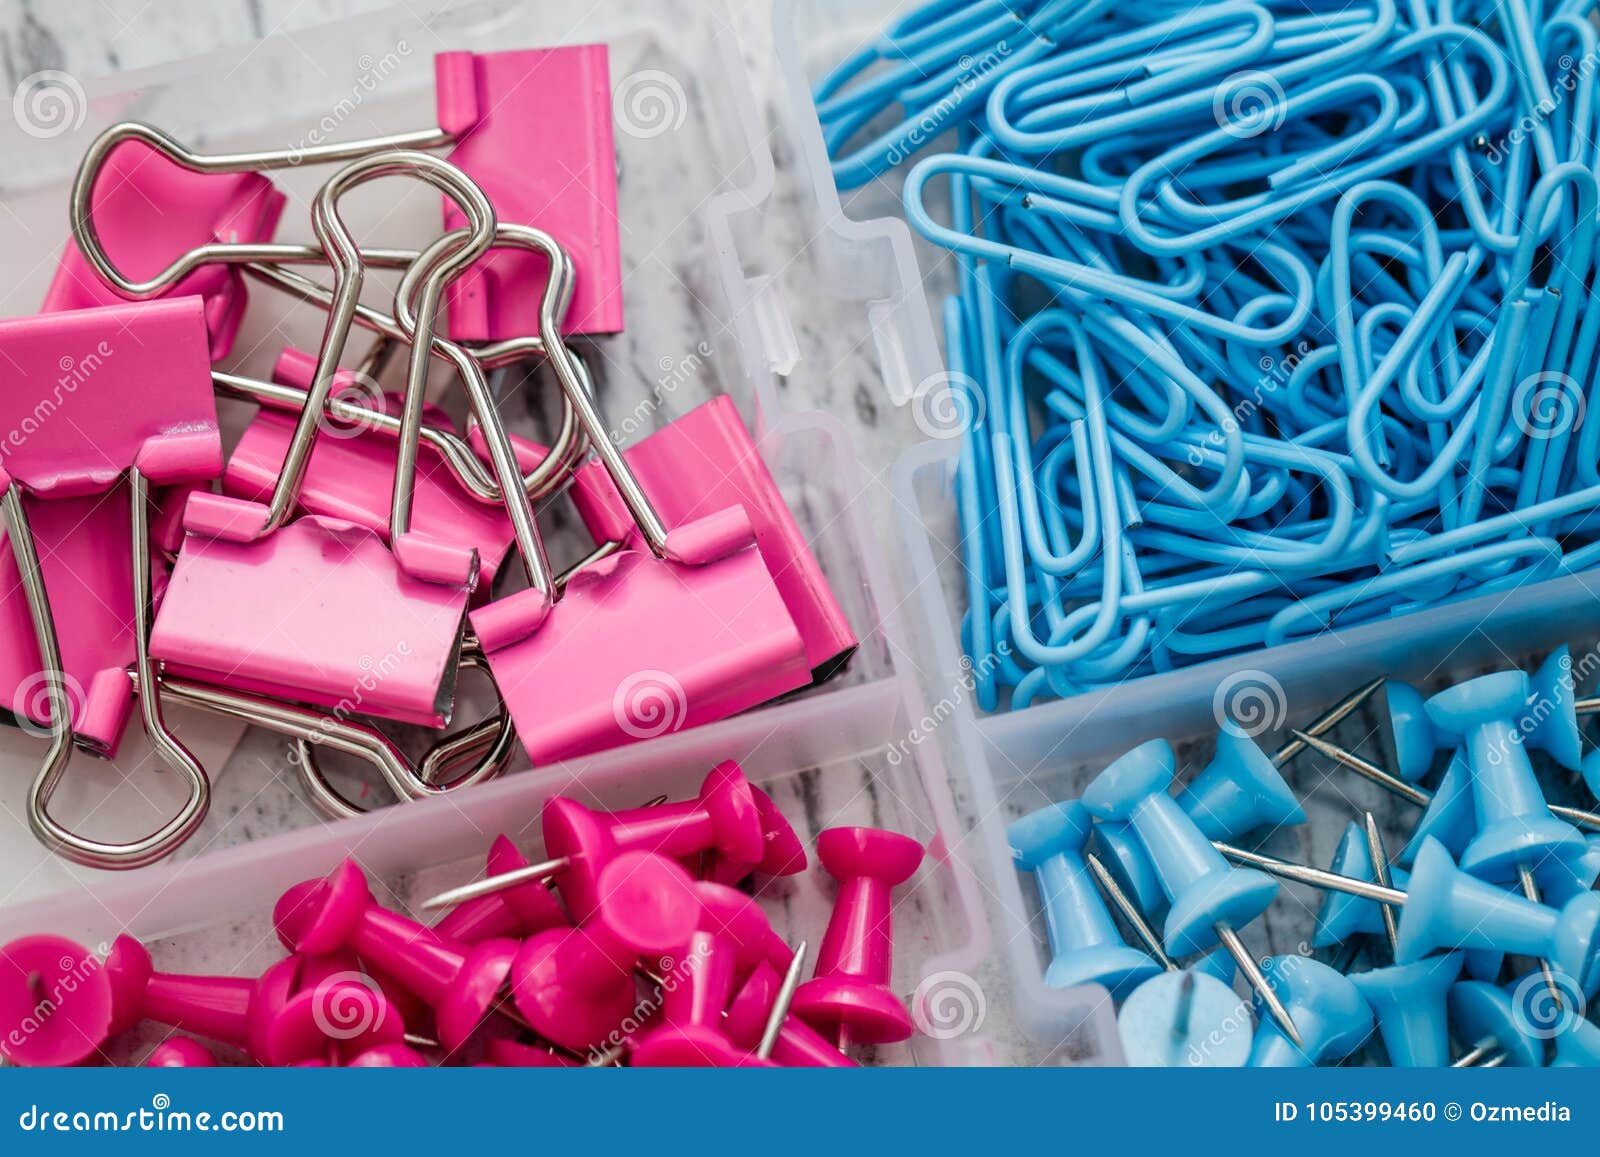 Fasteners Pins And Clips In Small Transparent Plastic Box Stock Photo